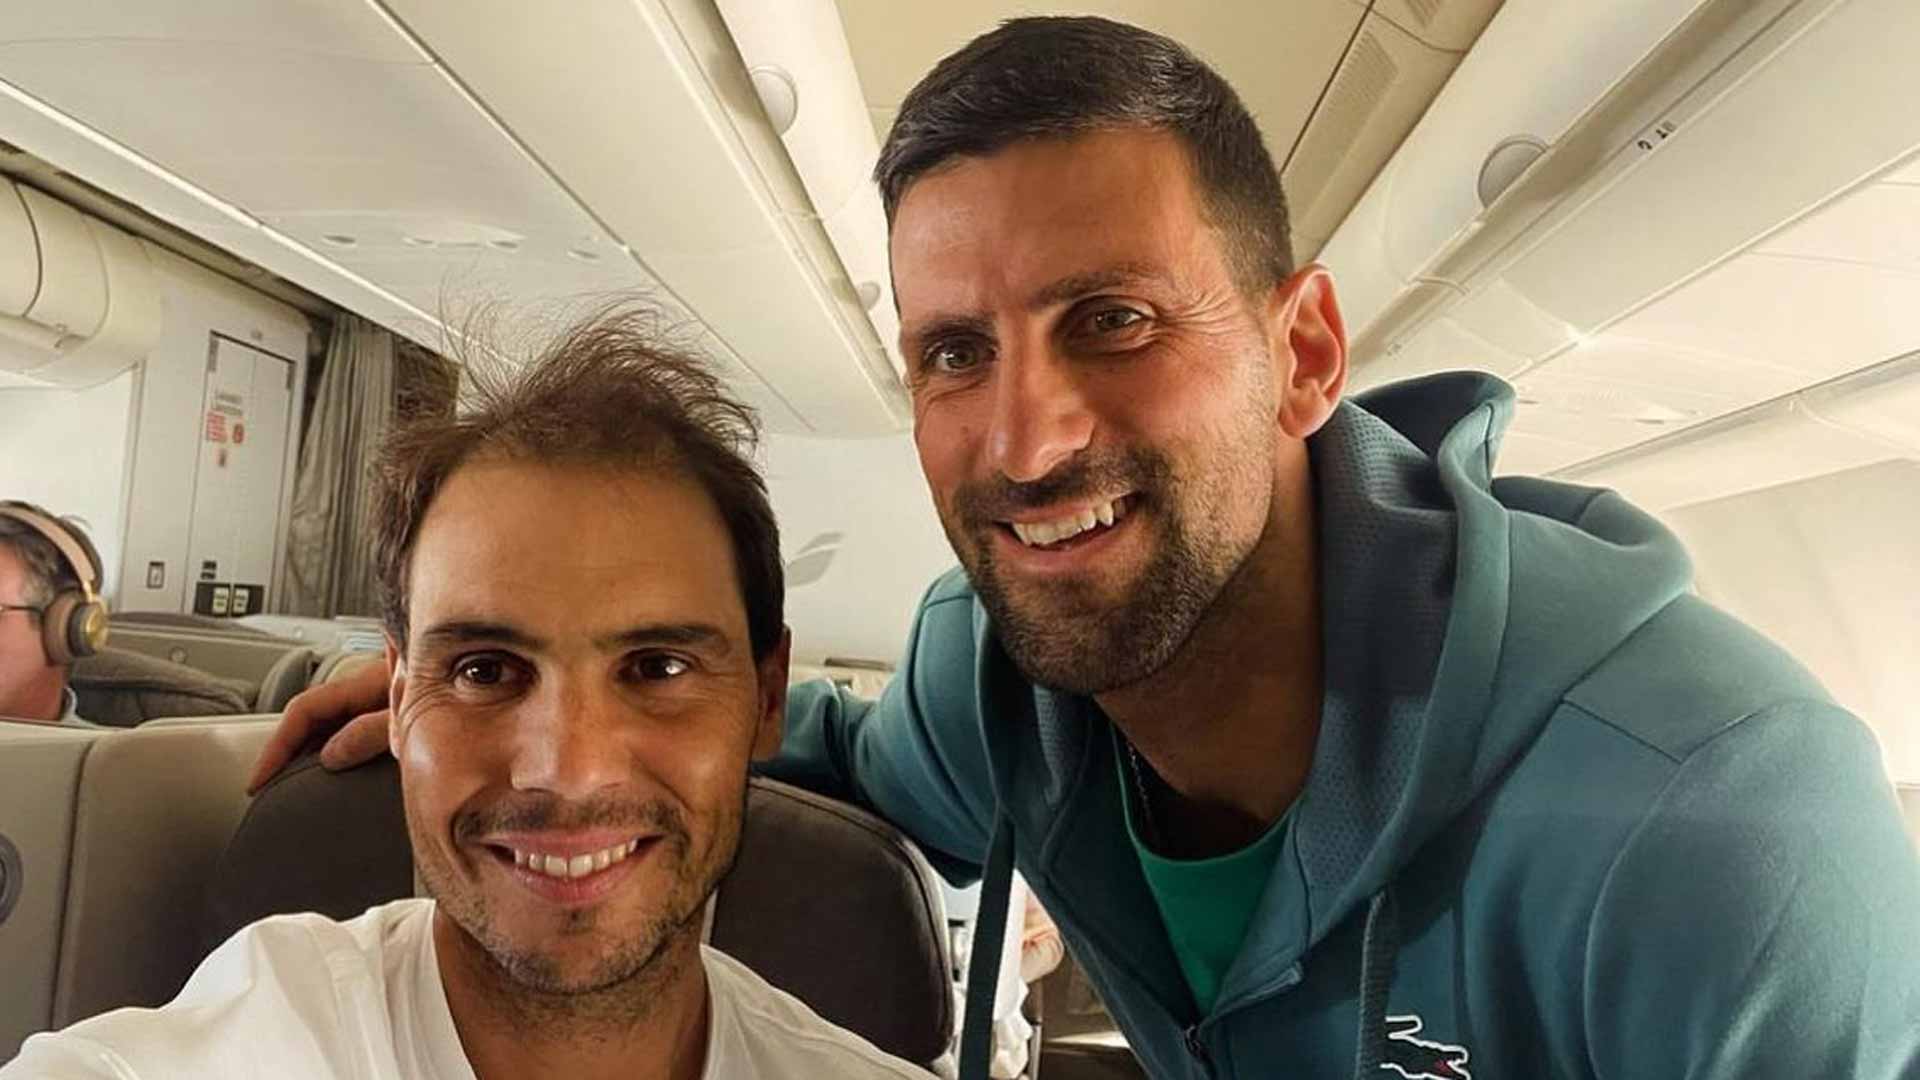 Rafael Nadal and Novak Djokovic en route to the United States together.